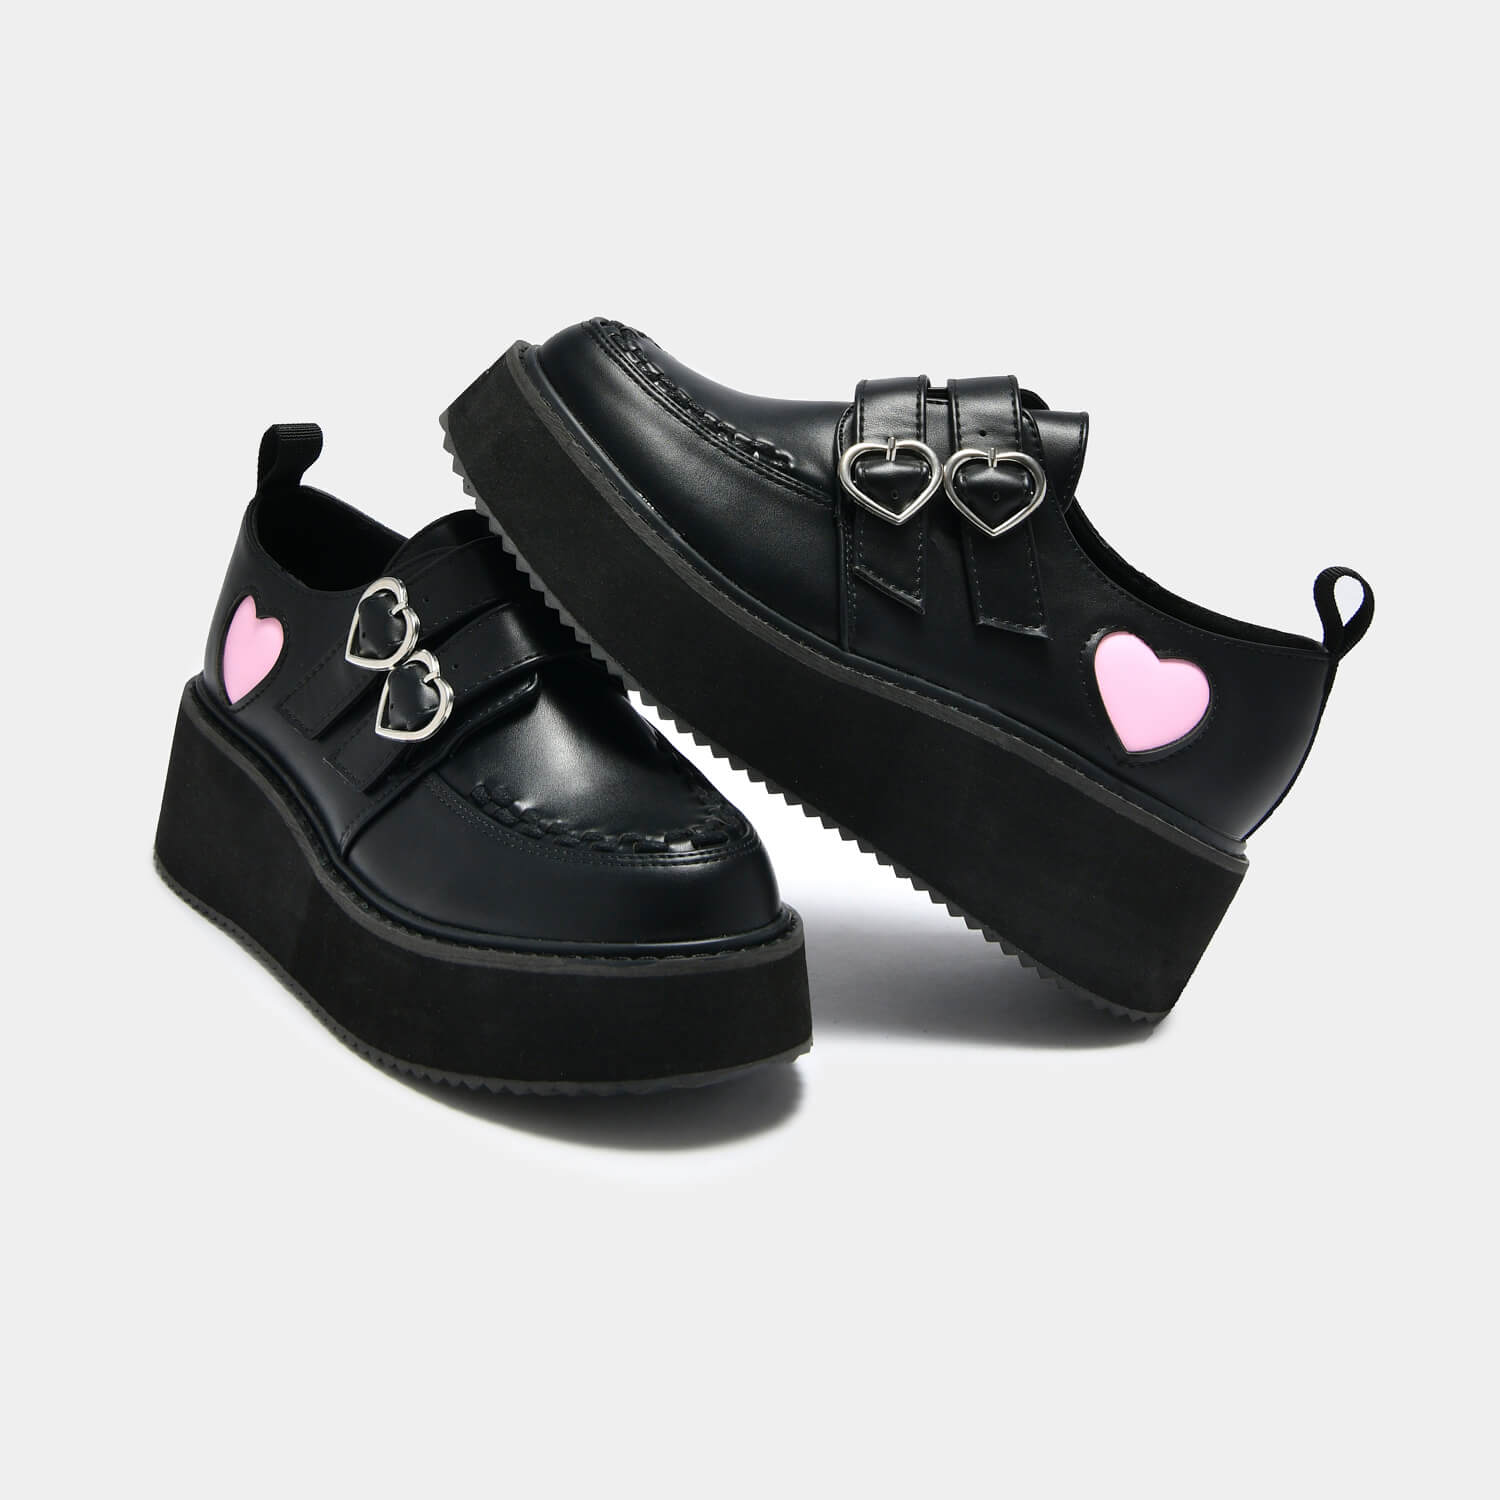 Pothos Pink Heart Wave Platform Shoes - Shoes - KOI Footwear - Black - Front and Side View